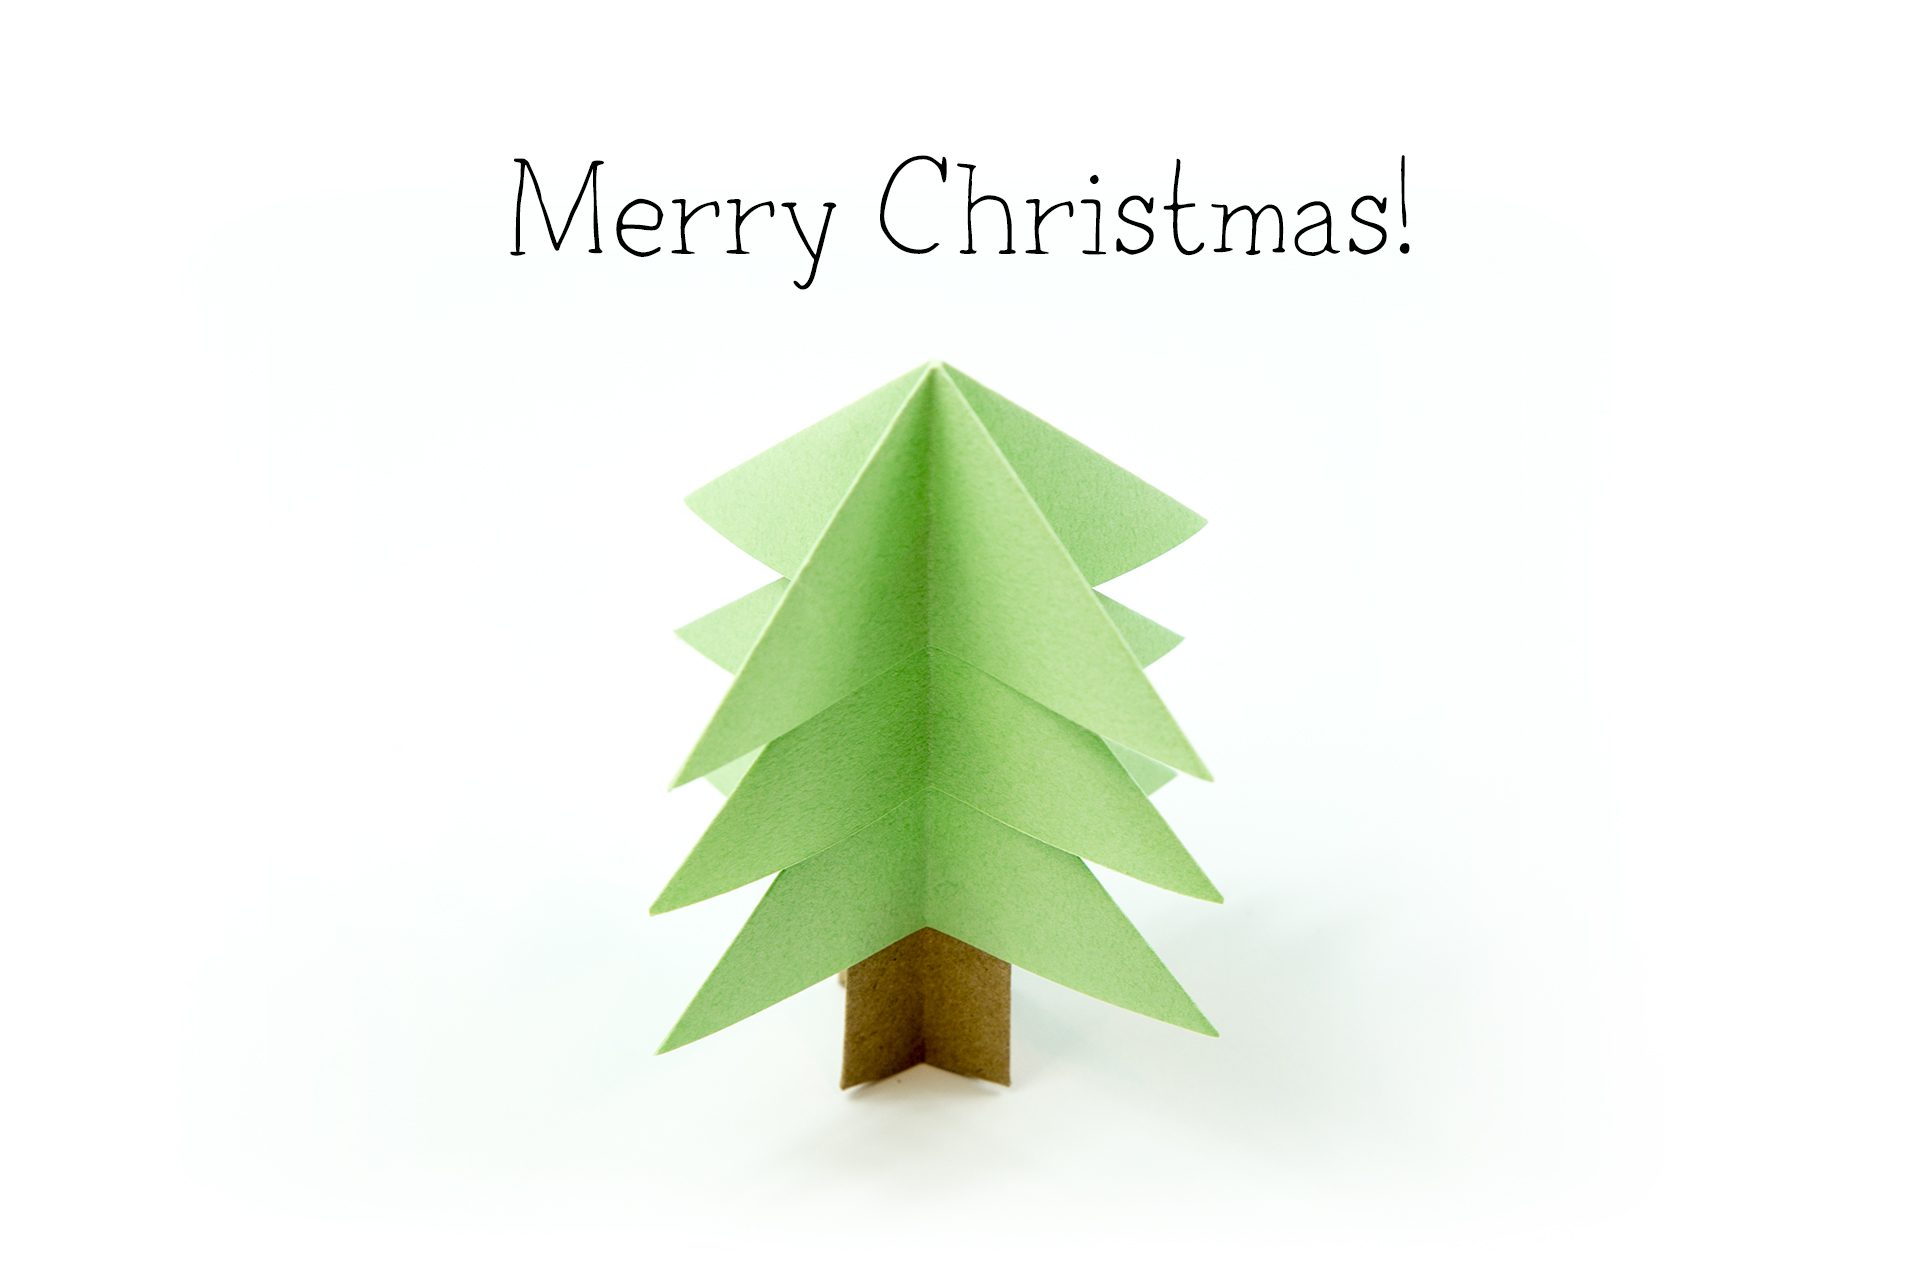 Merry Christmas from Paper Kawaii!